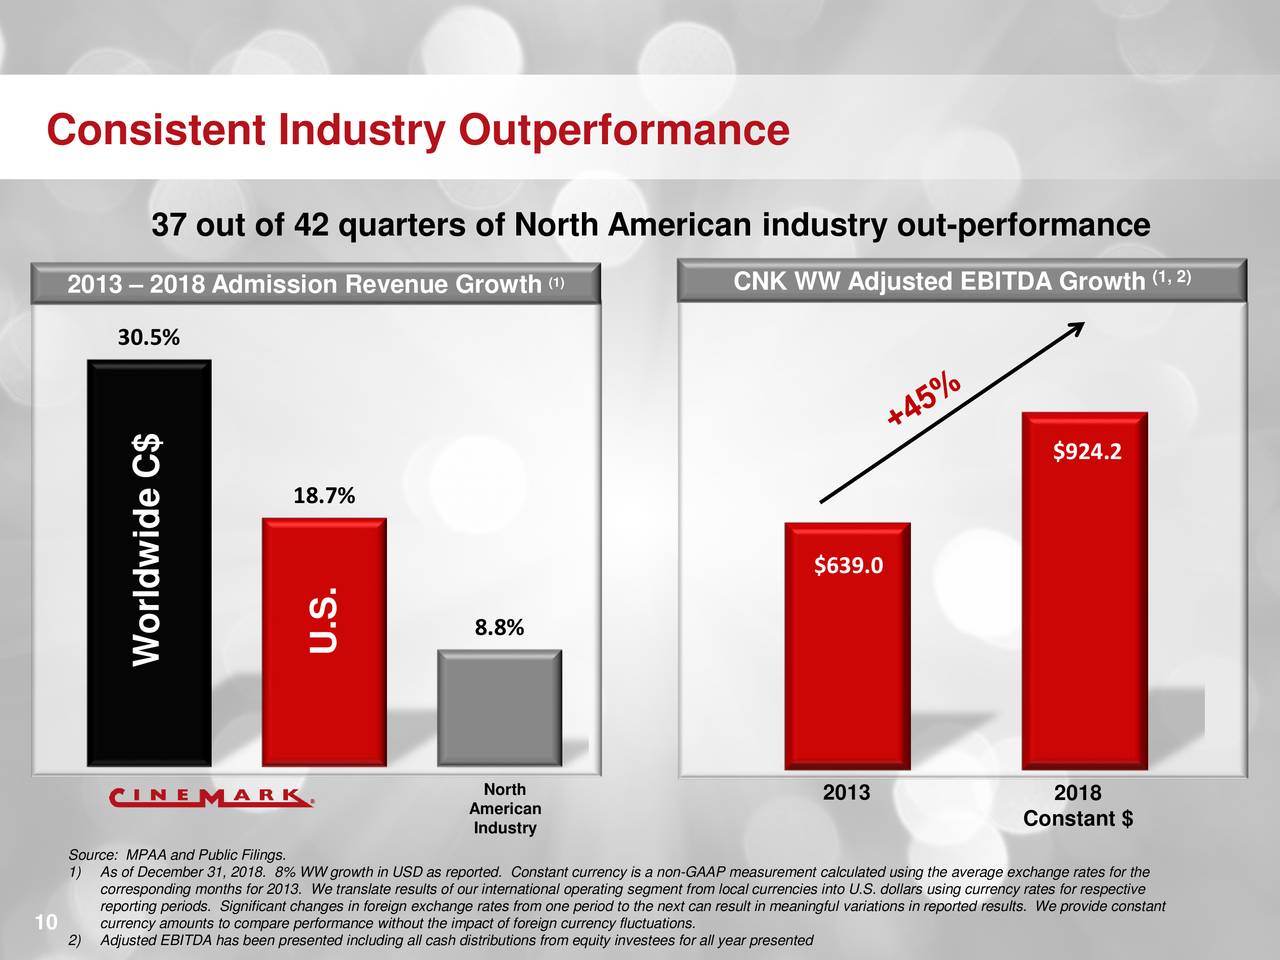 Consistent Industry Outperformance